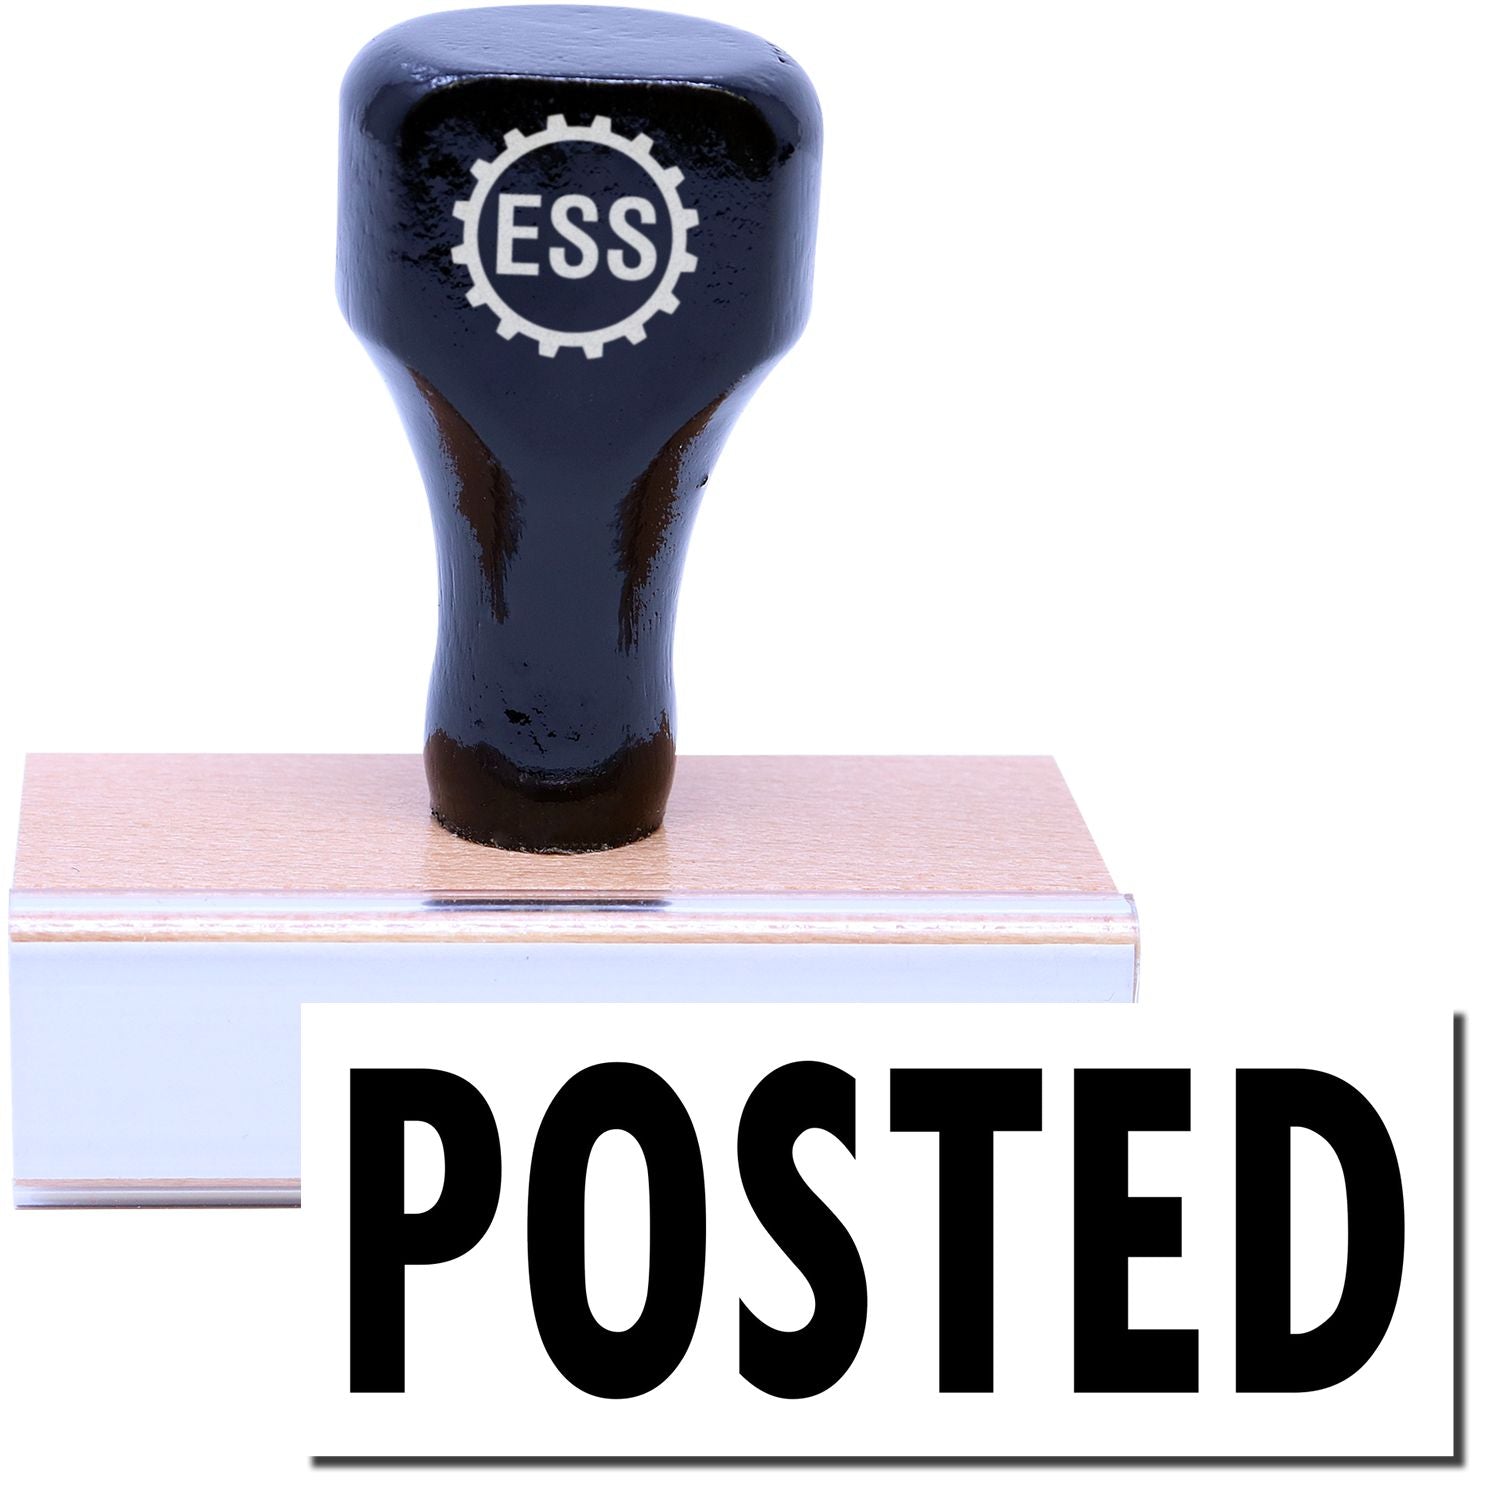 A stock office rubber stamp with a stamped image showing how the text "POSTED" is displayed after stamping.